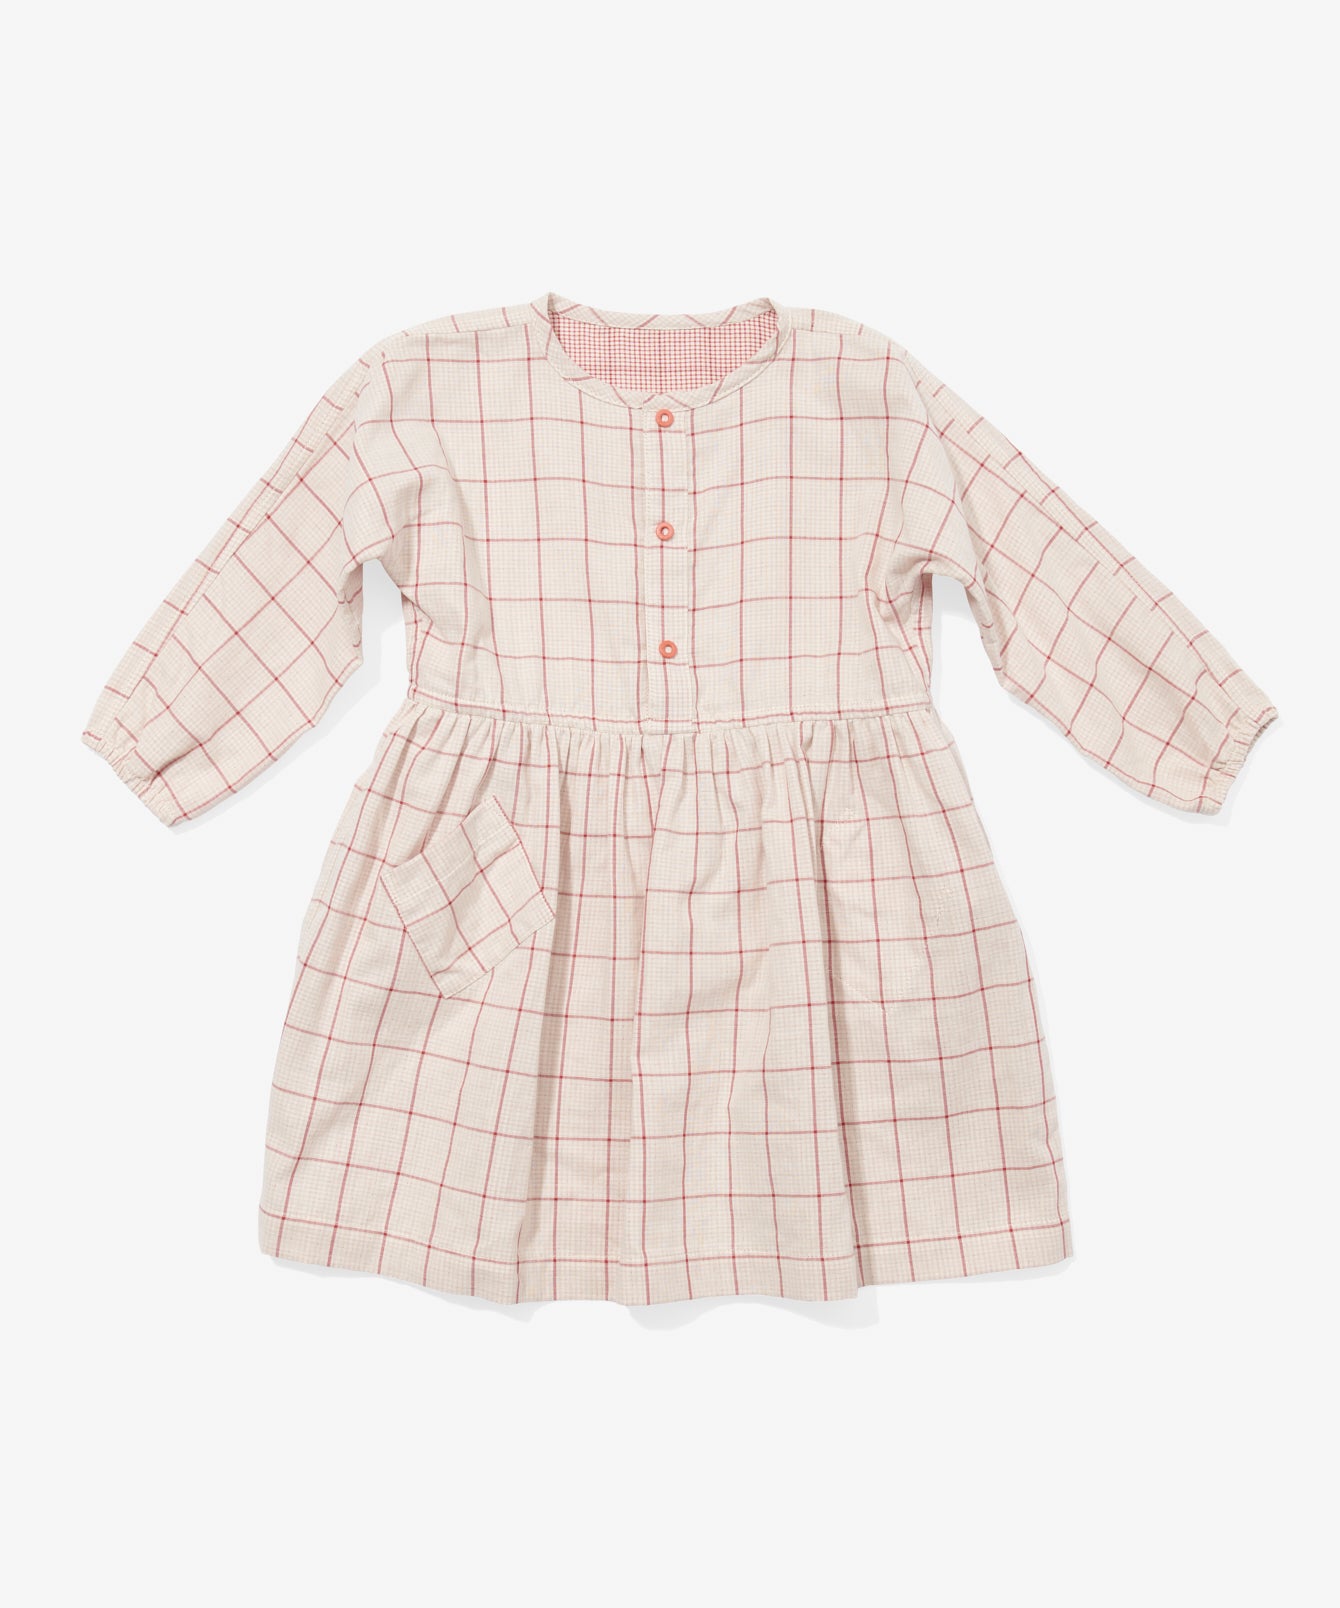 Little Girls Reversible Dress | Oso and Me – Oso & Me